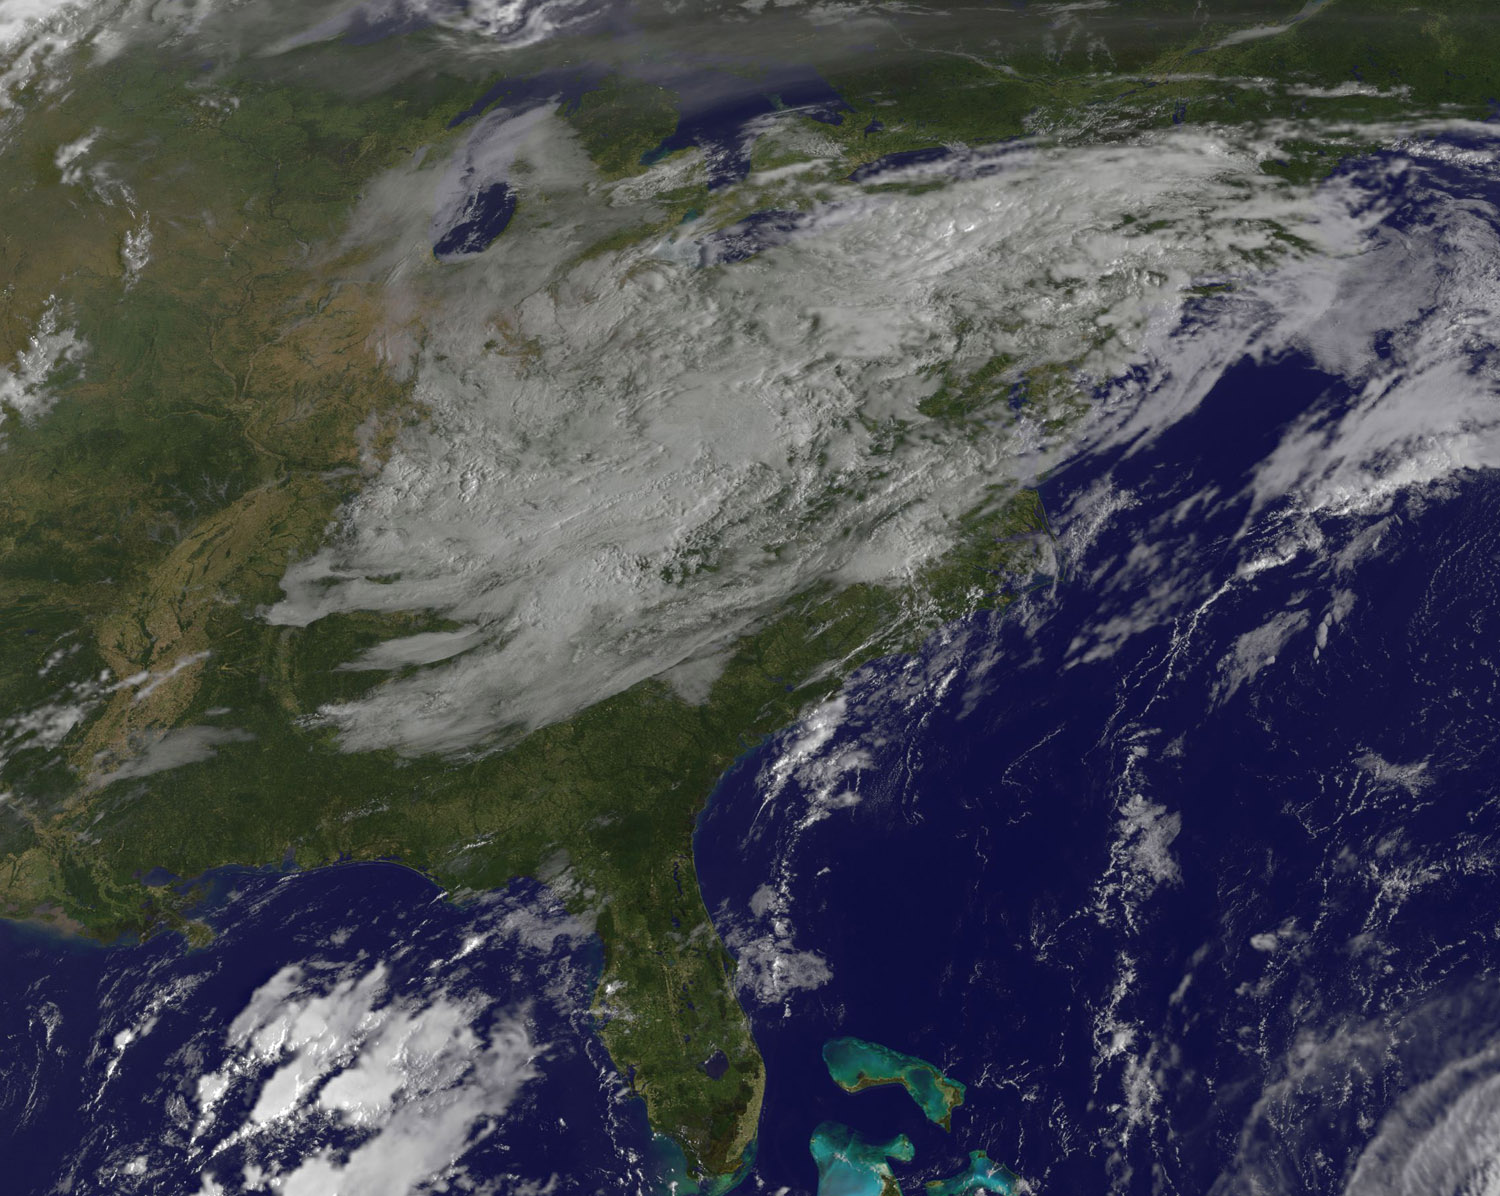 Satellite image of Irma, a mass of clouds over the eastern central US.